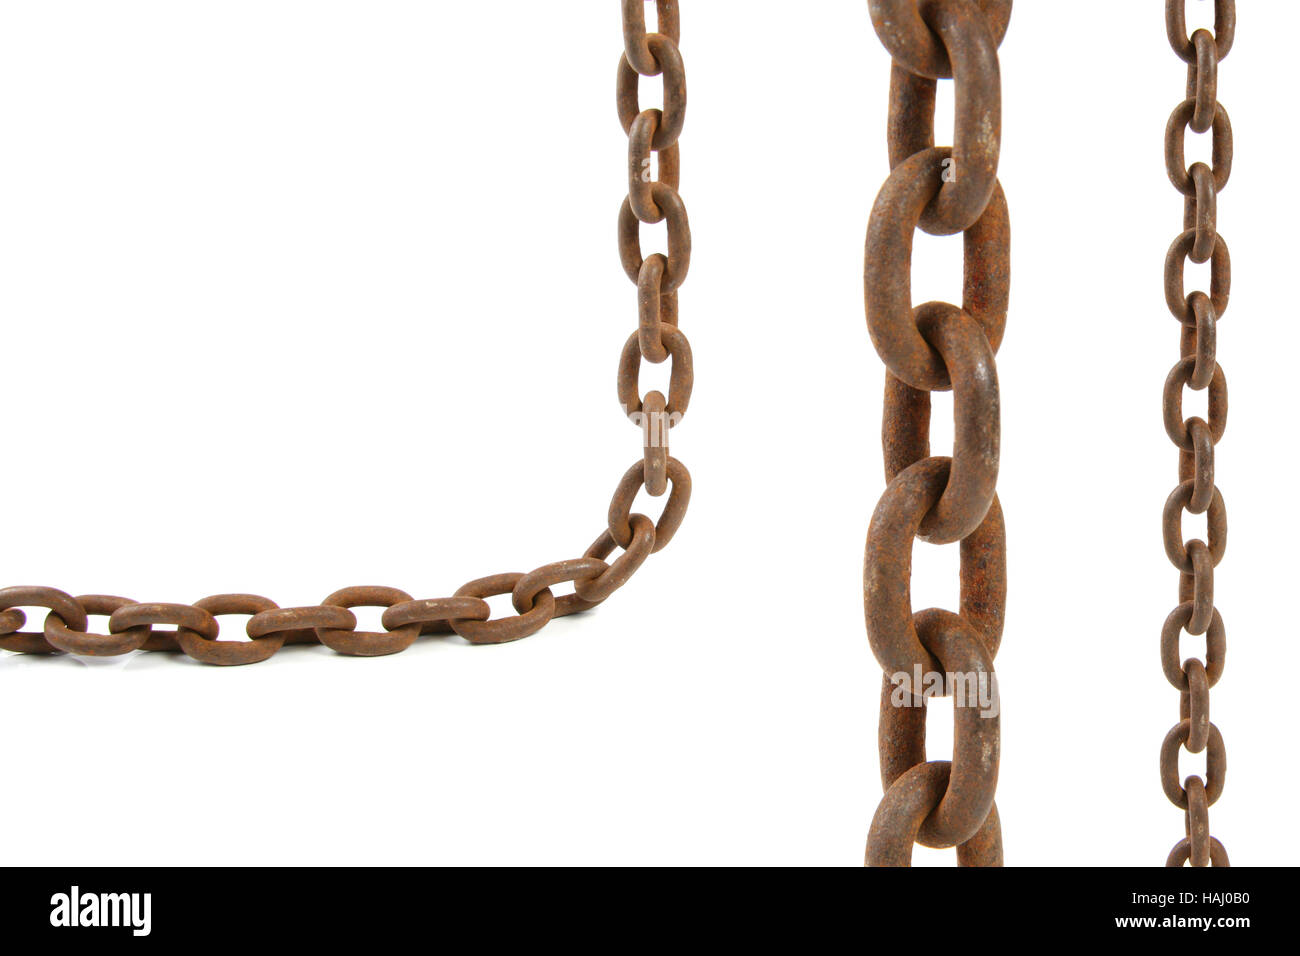 Rusty chain elements isolated on white background Stock Photo